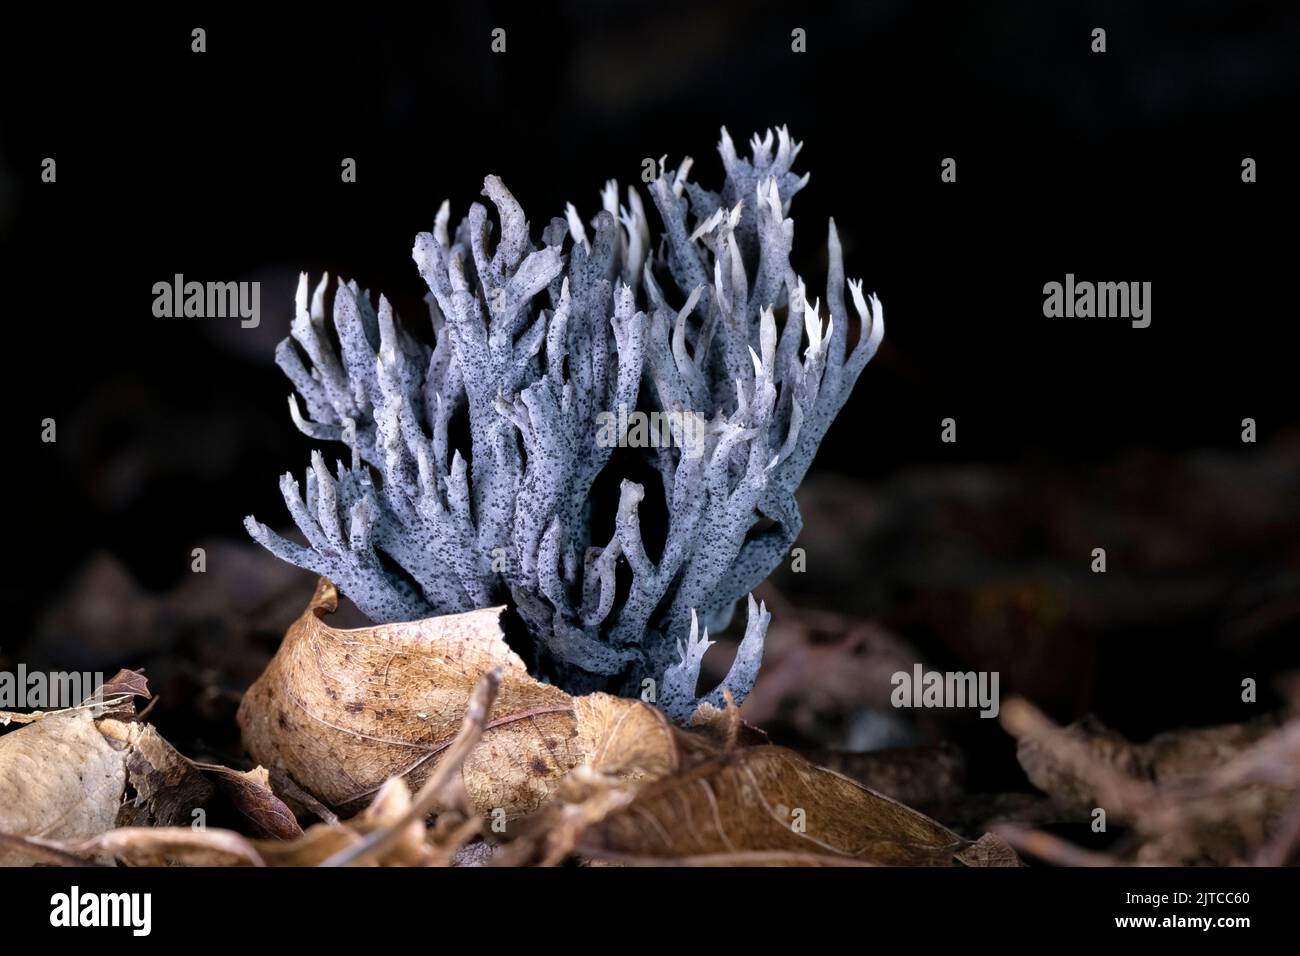 Coral Mushroom (Clavulina cristata) perhaps parasitized by Helminthosphaeria clavariarum giving the gray color - near Pisgah National Forest, Brevard, Stock Photo